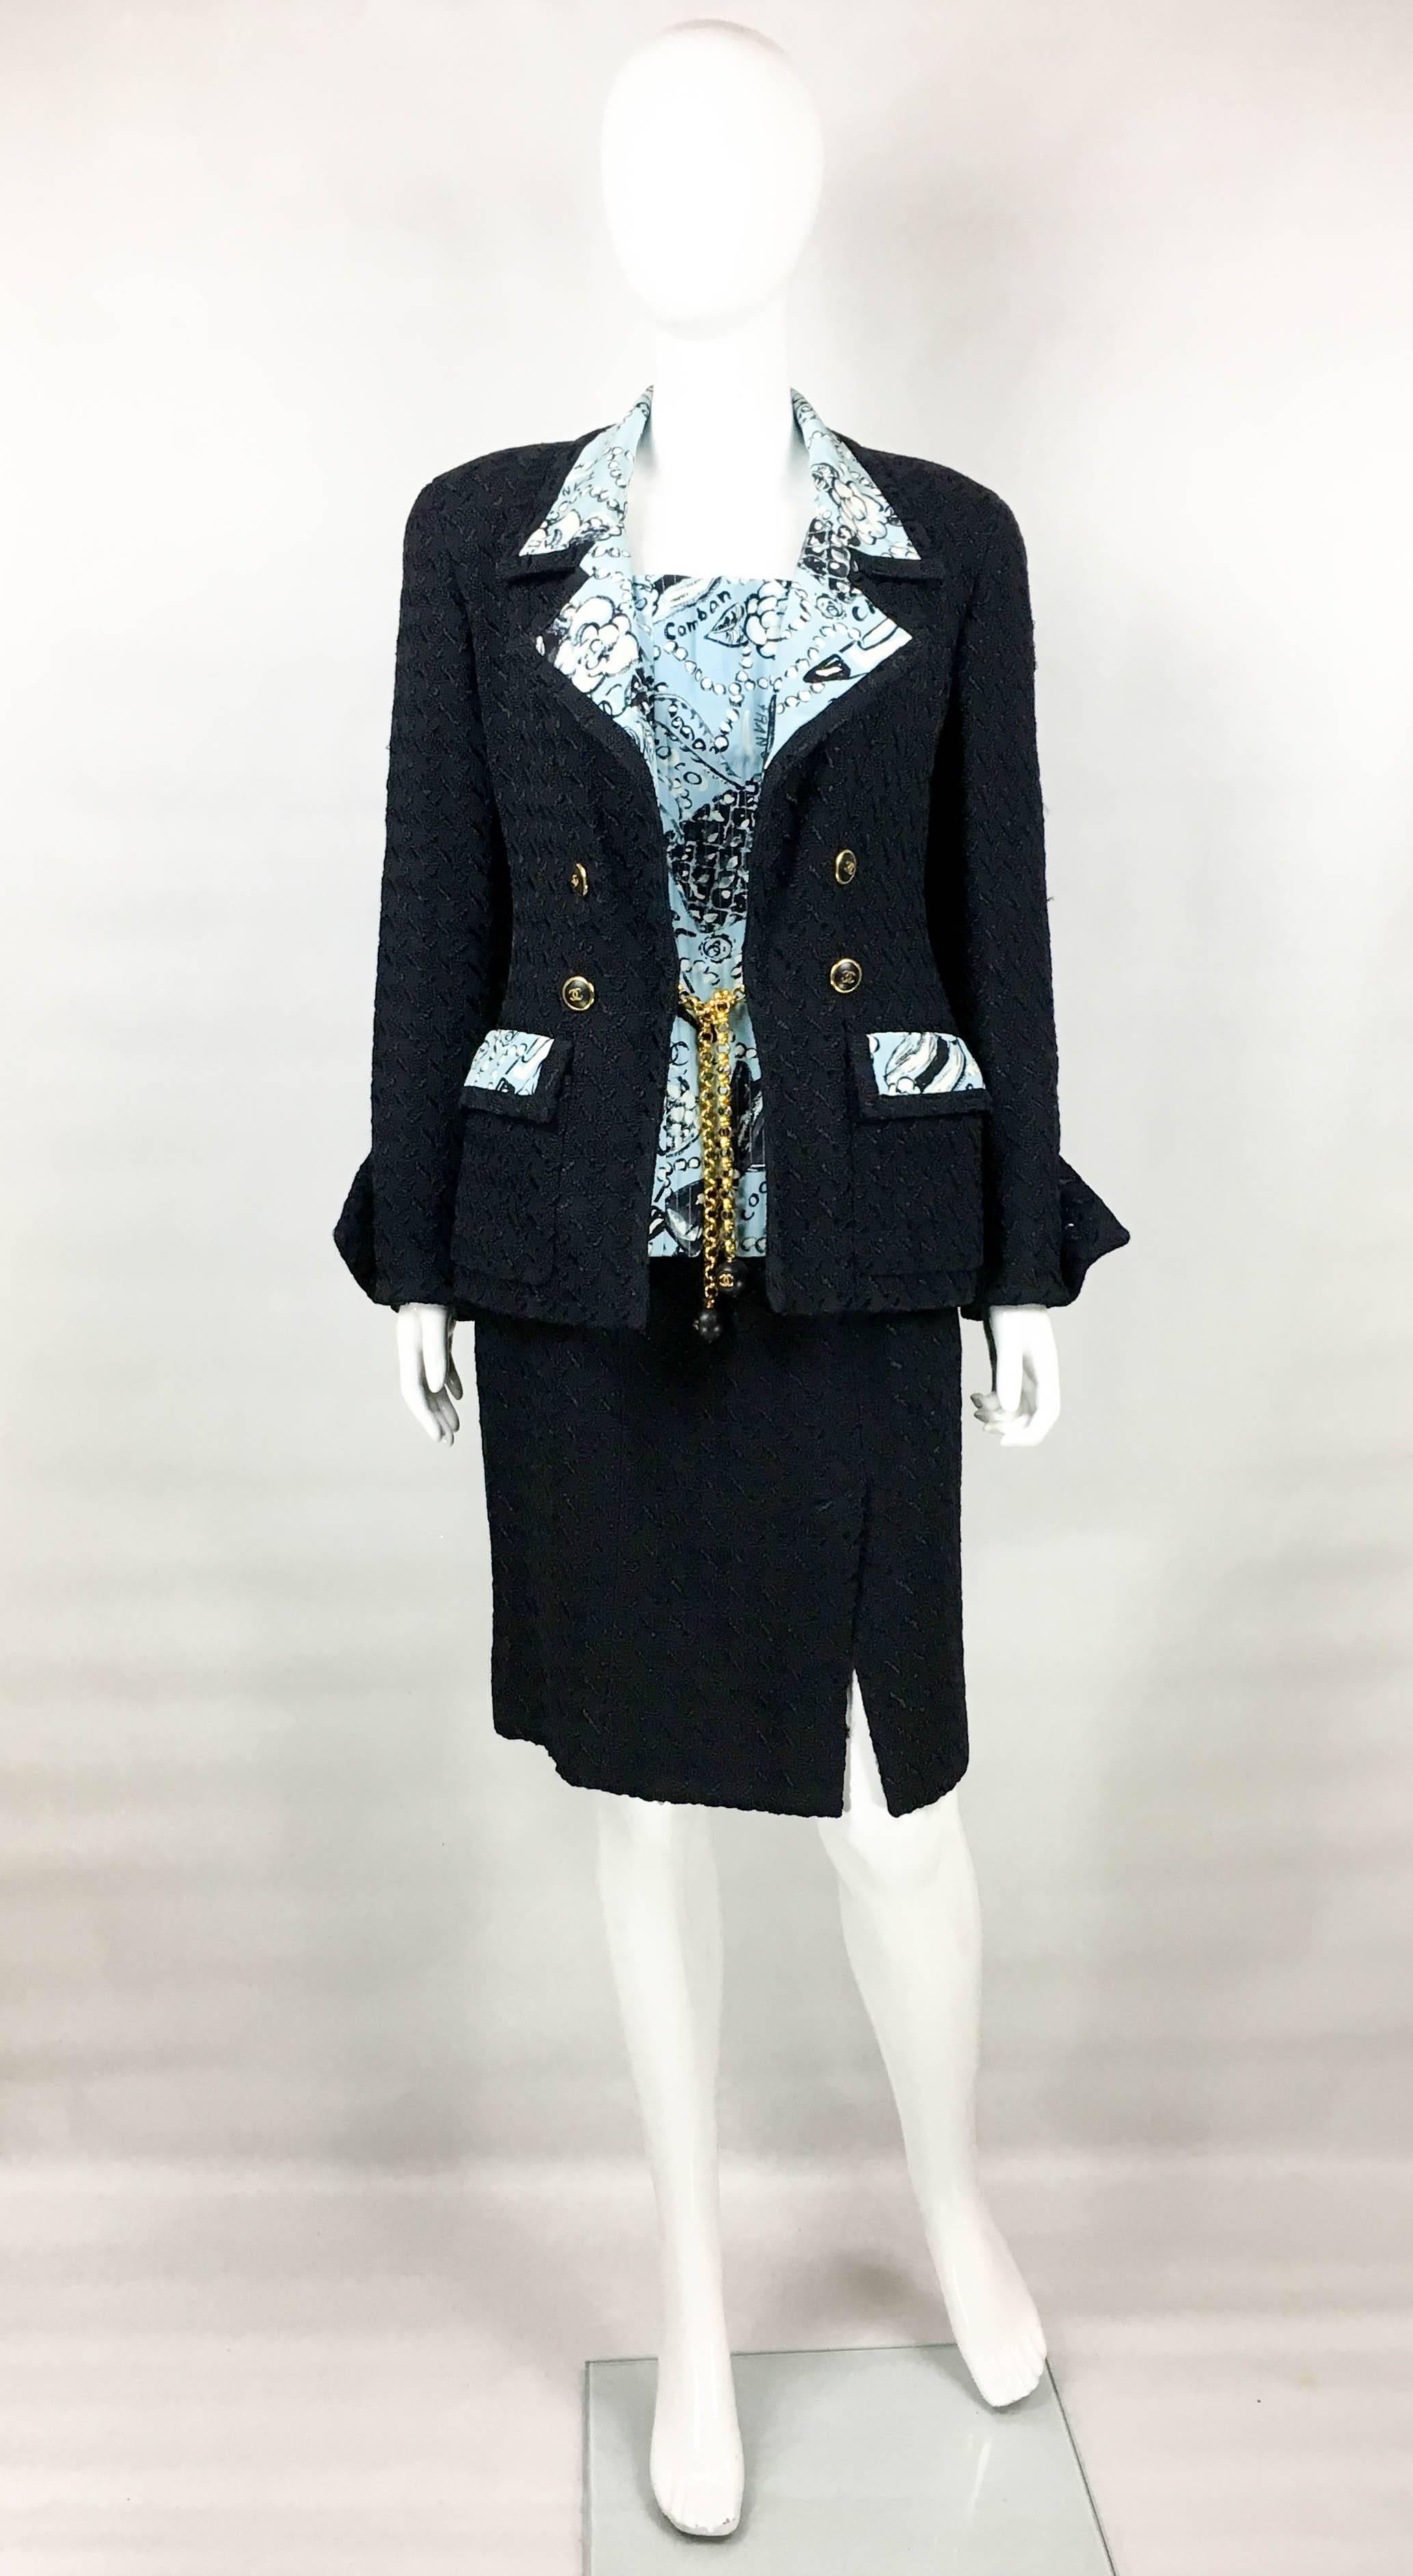 Vintage Chanel Black Wool Boucle 3-Piece Ensemble. This gorgeous ensemble by Chanel, comprising of a jacket, skirt and bustier-like bodice, was created for the 1993 Spring / Summer Collection. The black jacket is made in patterned wool boucle and it